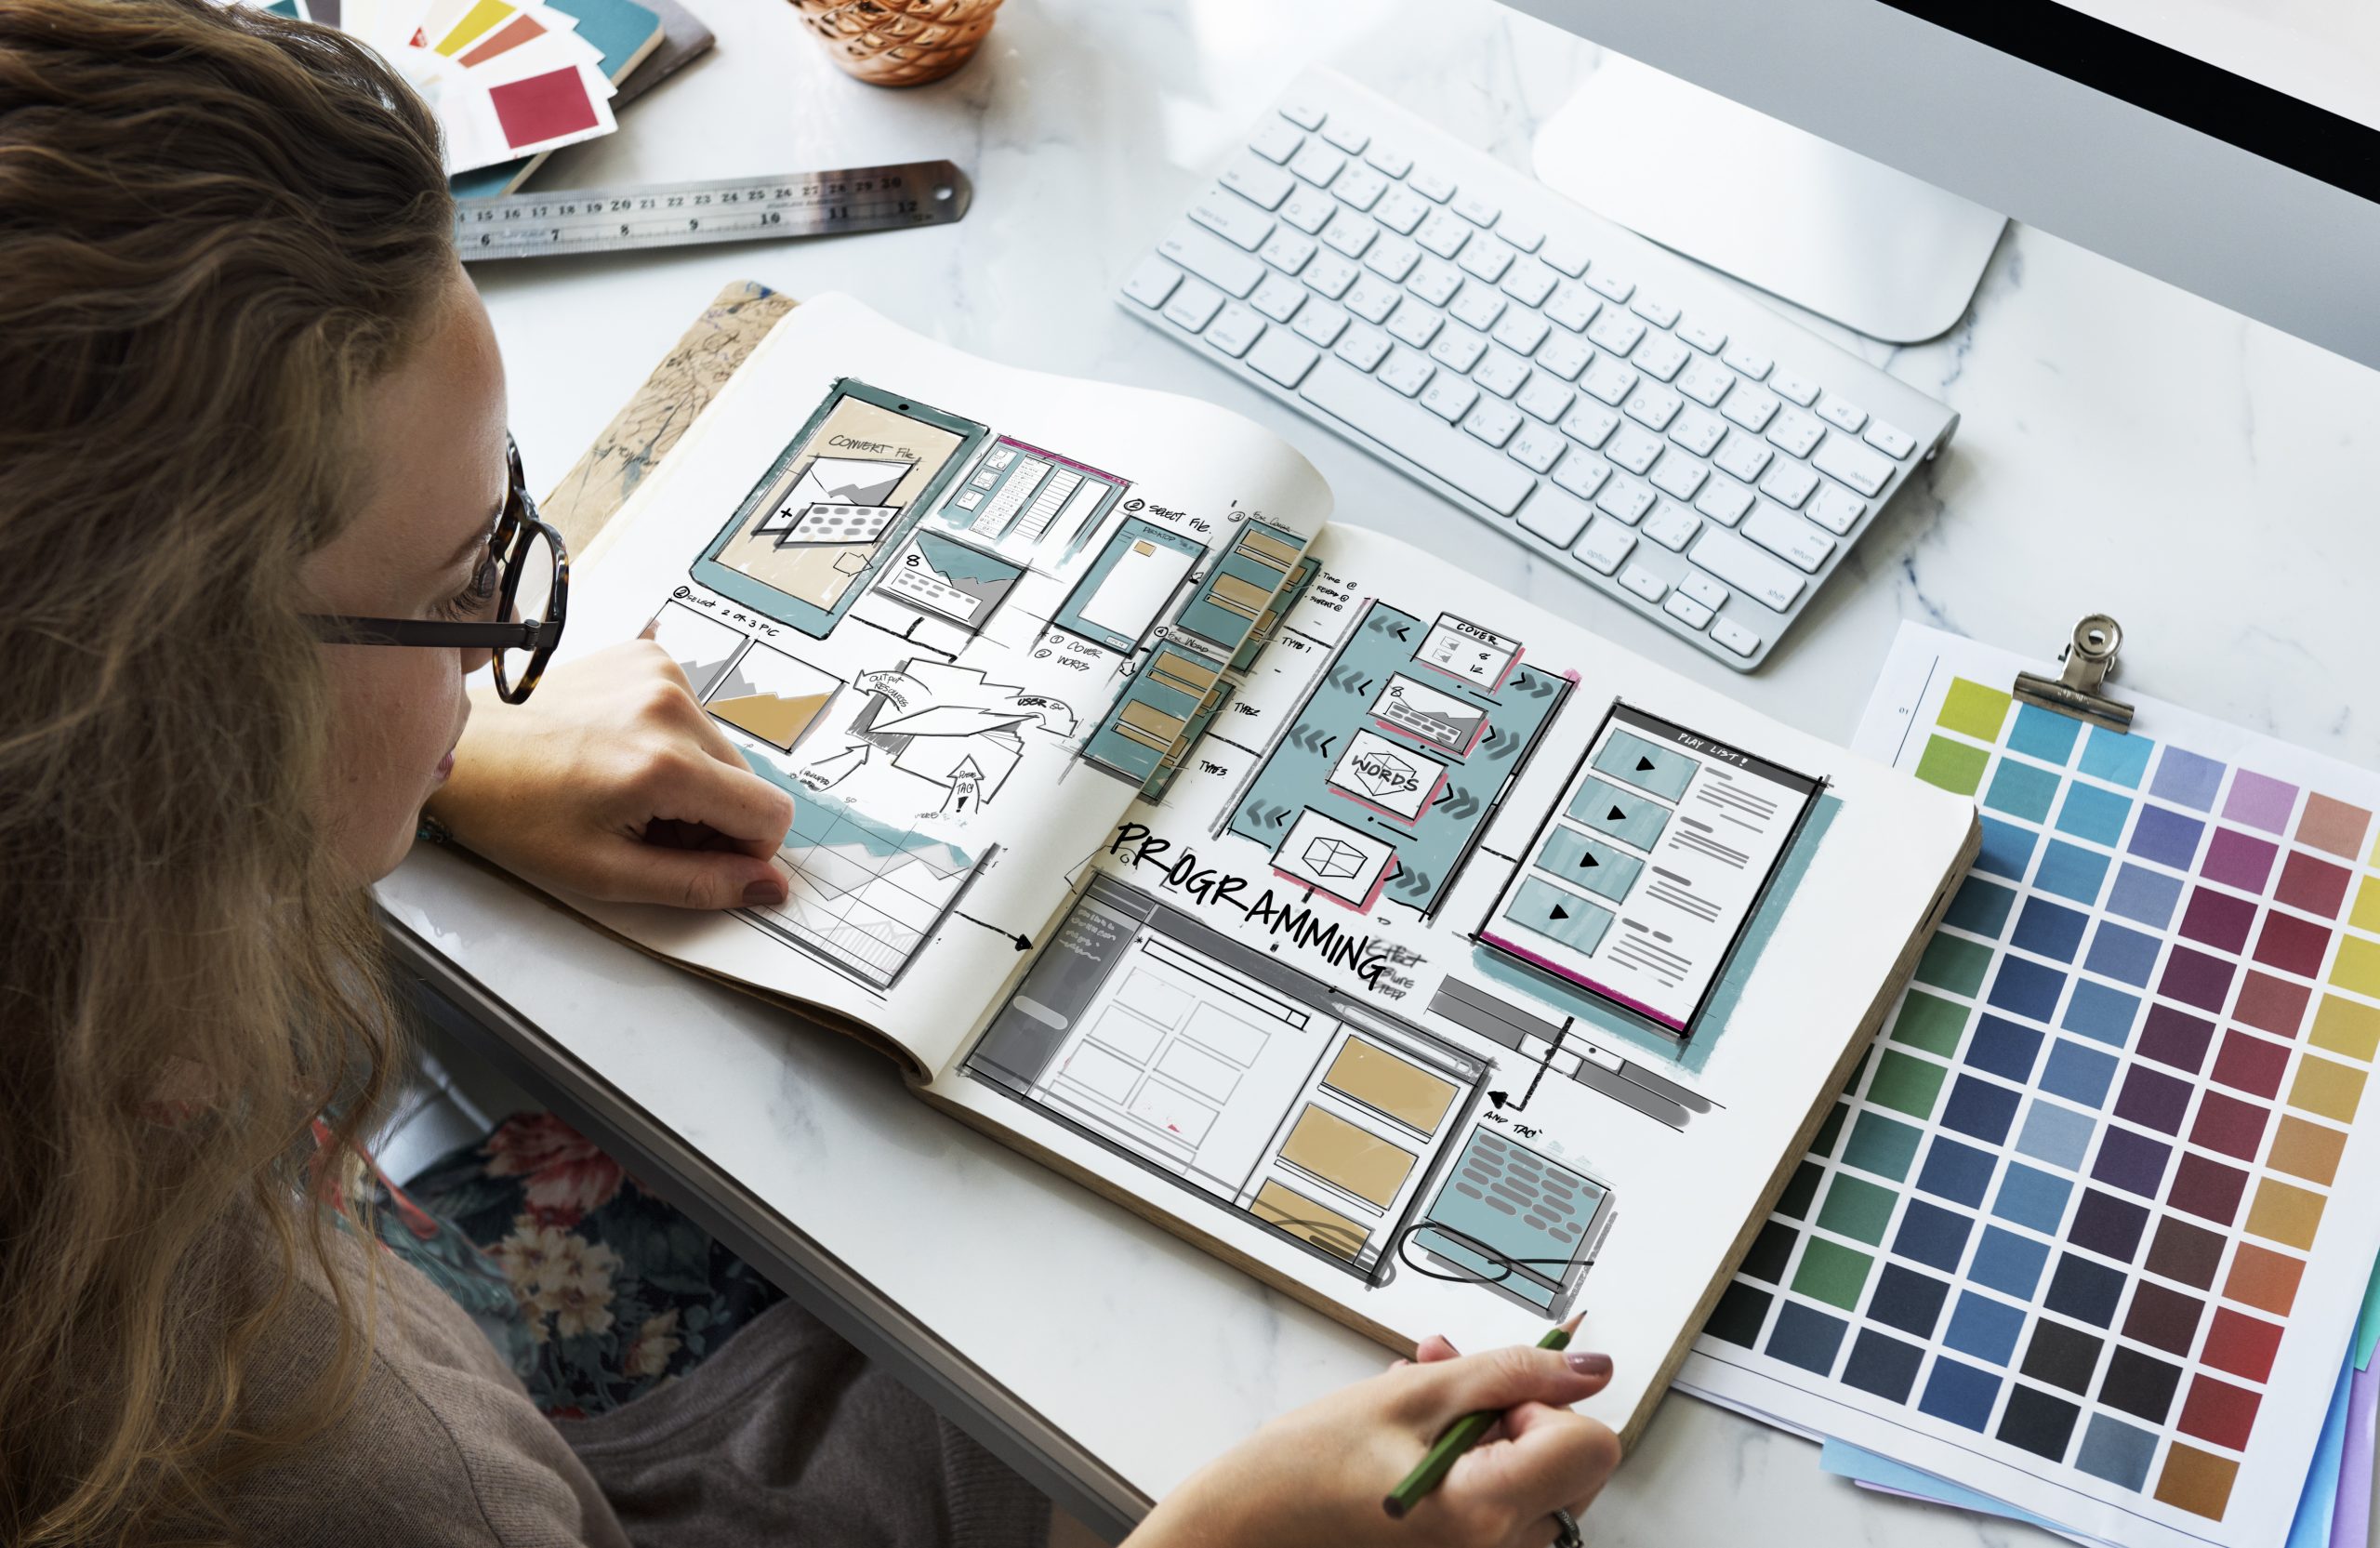 How to become a UX Designer: 5 Steps from Junior to Senior Level